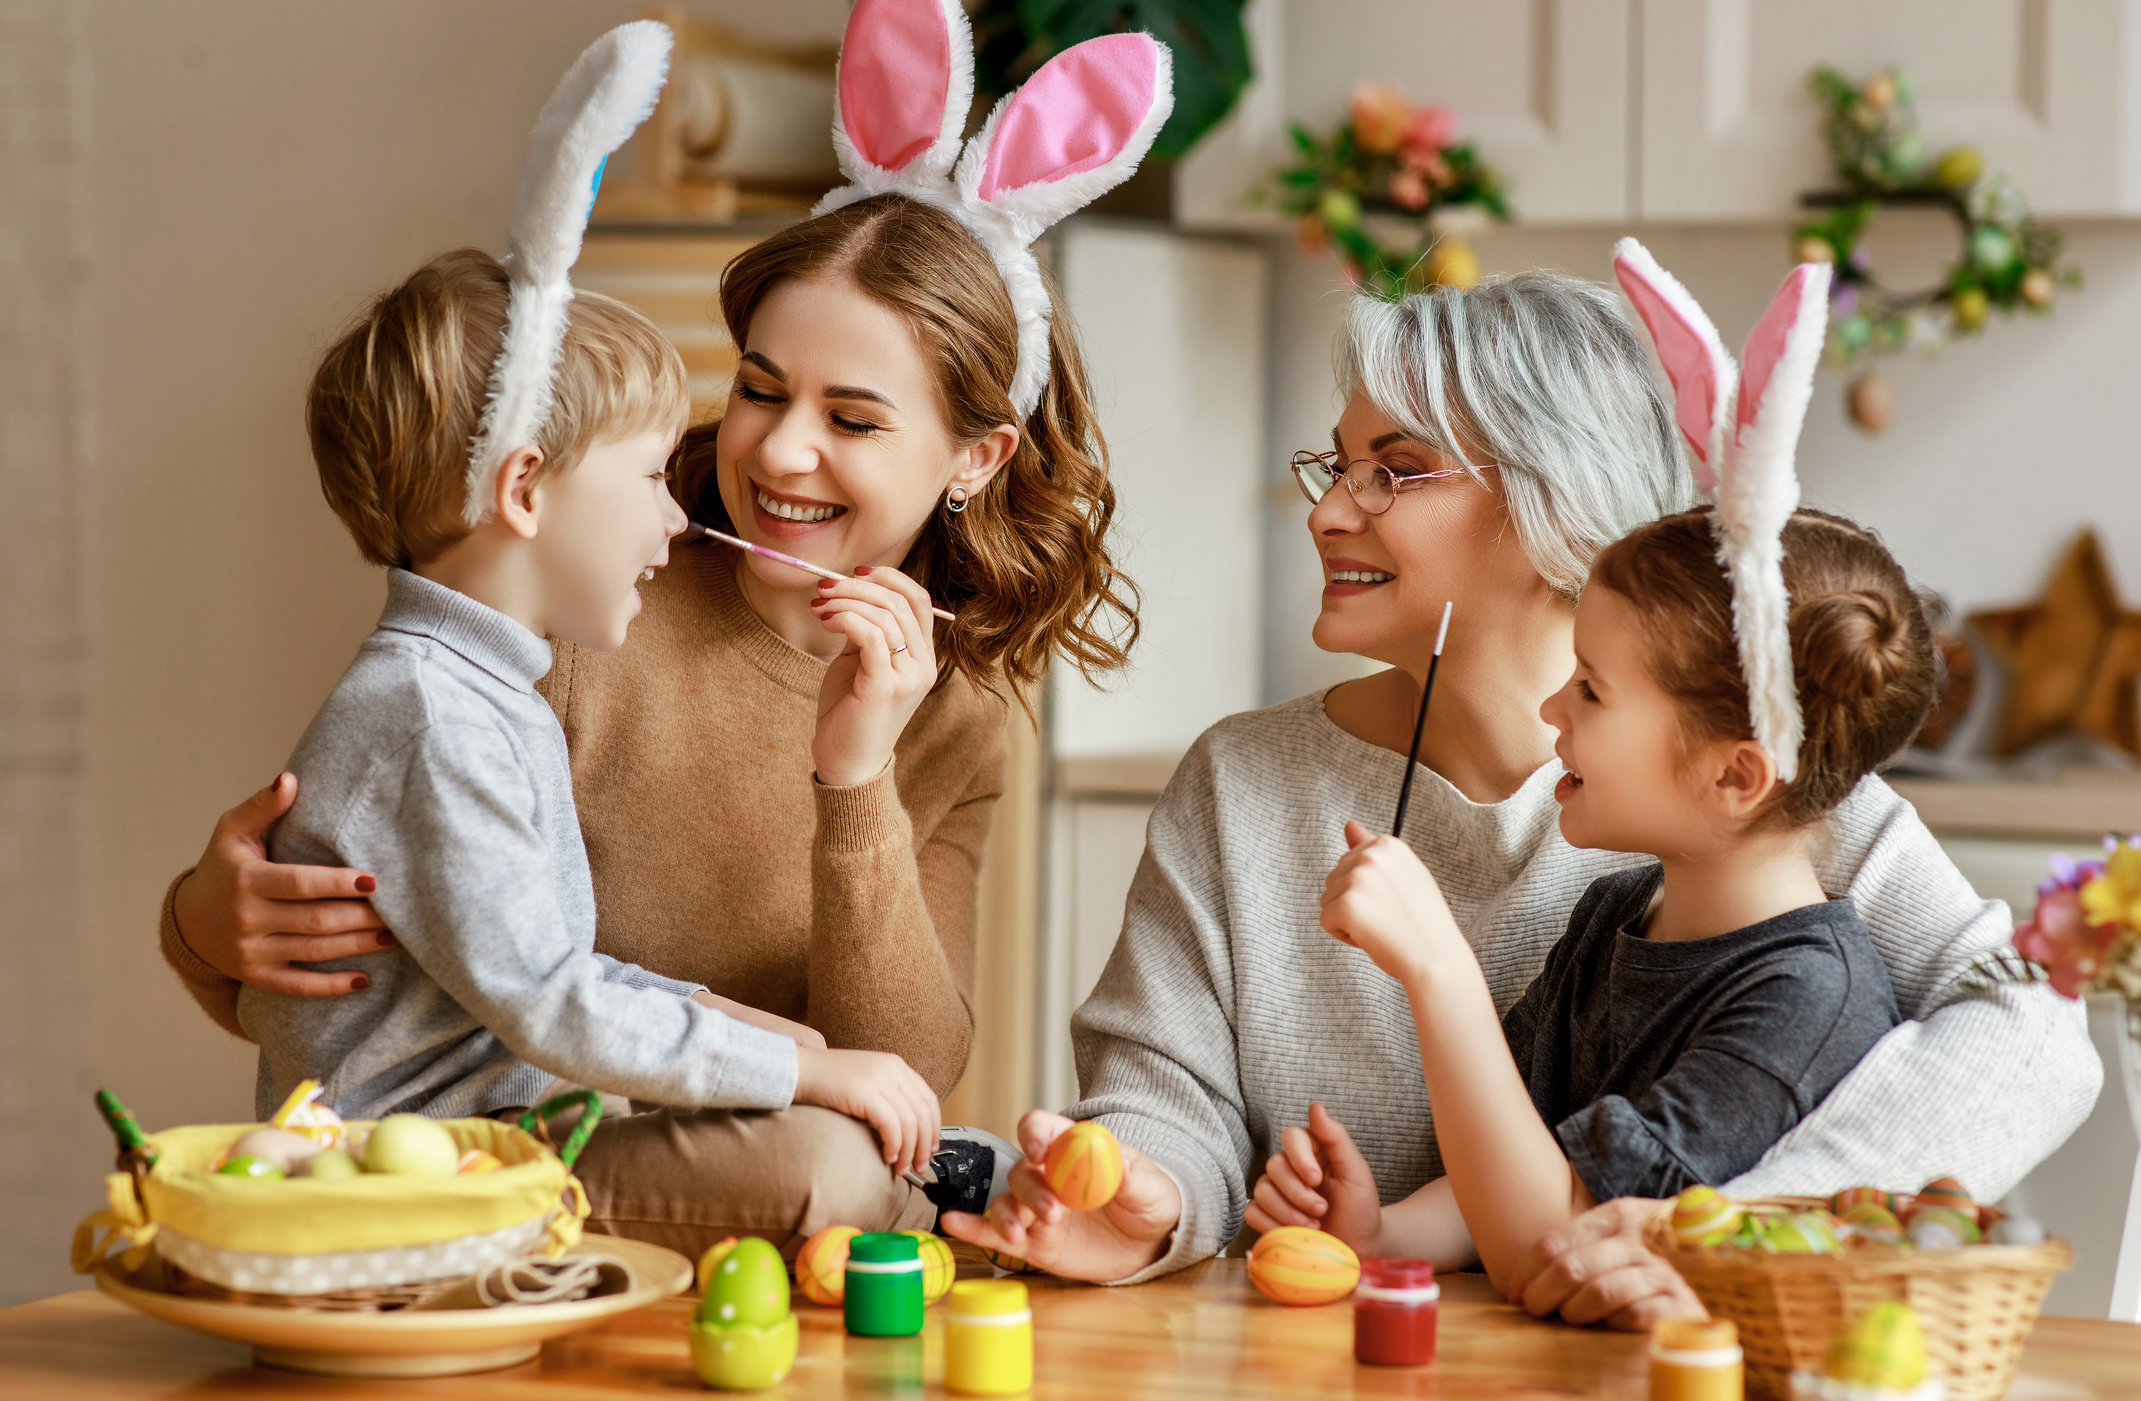 Randol Mill West is Your Easter 2021 and Springtime Celebration One-Stop-Shop in Arlington